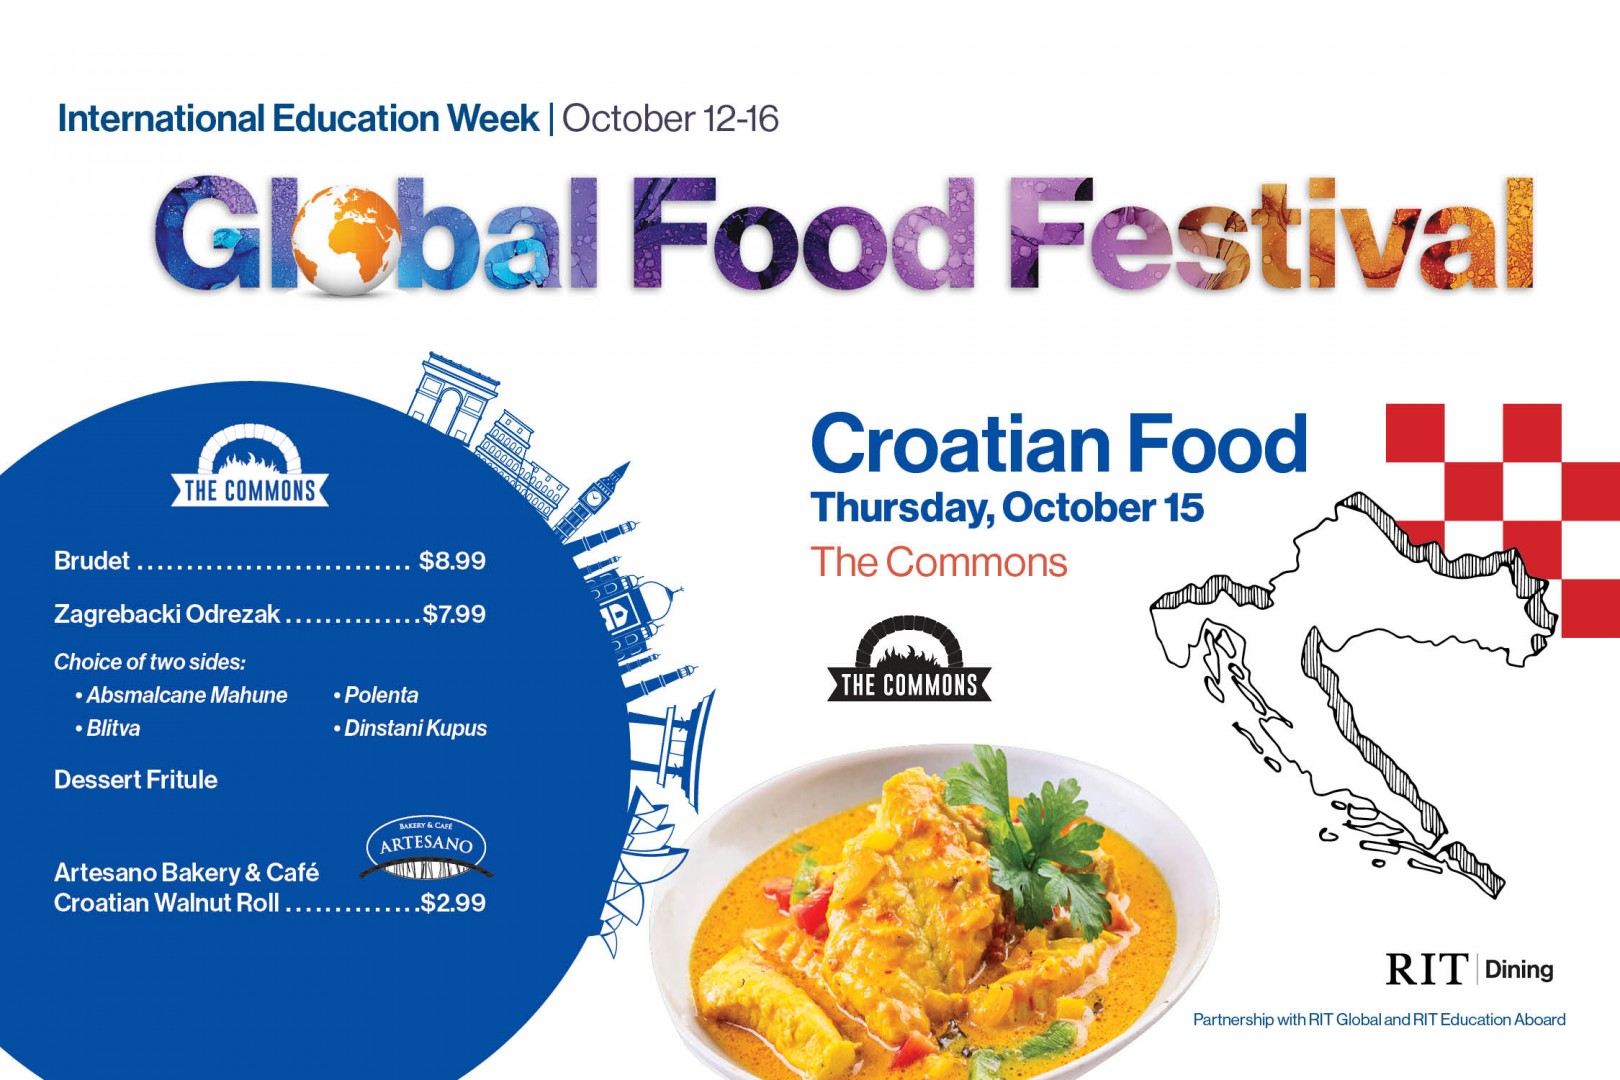 Graphic with text "Global Food Festival", "Croatian Food", and outline of country